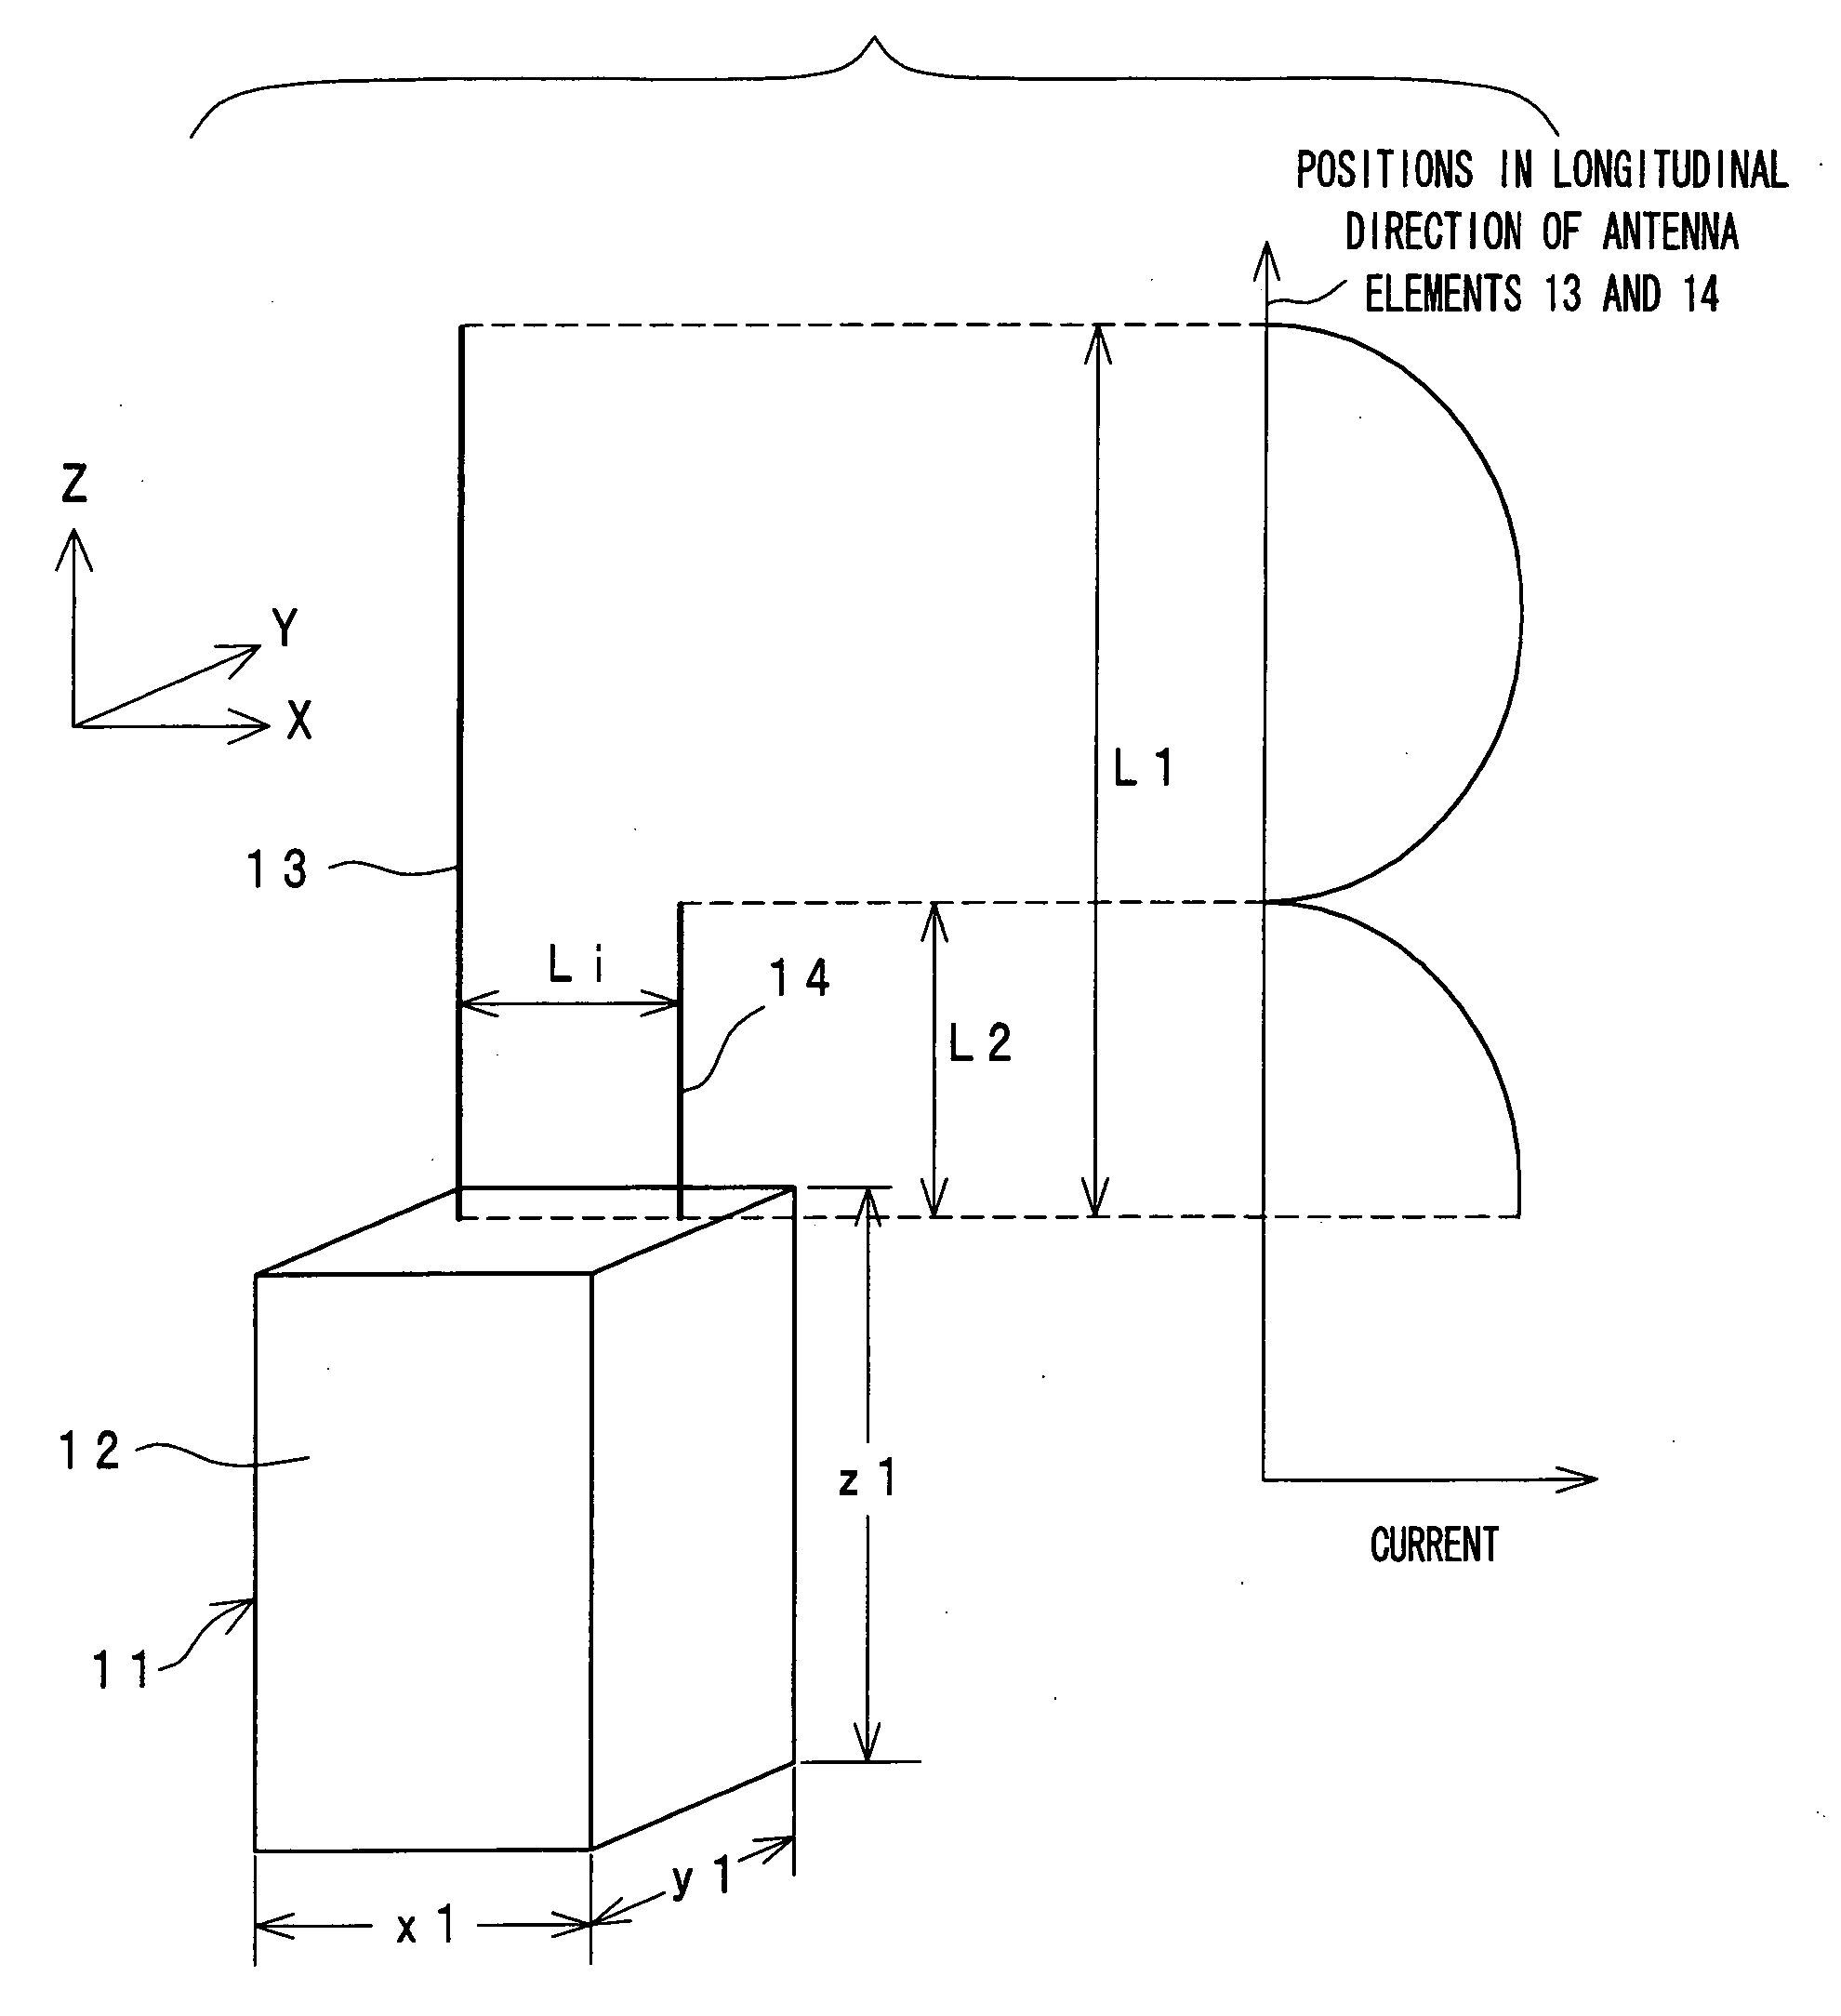 Adaptive antenna apparatus including adaptive controller for adaptive controlling at least two antenna elements